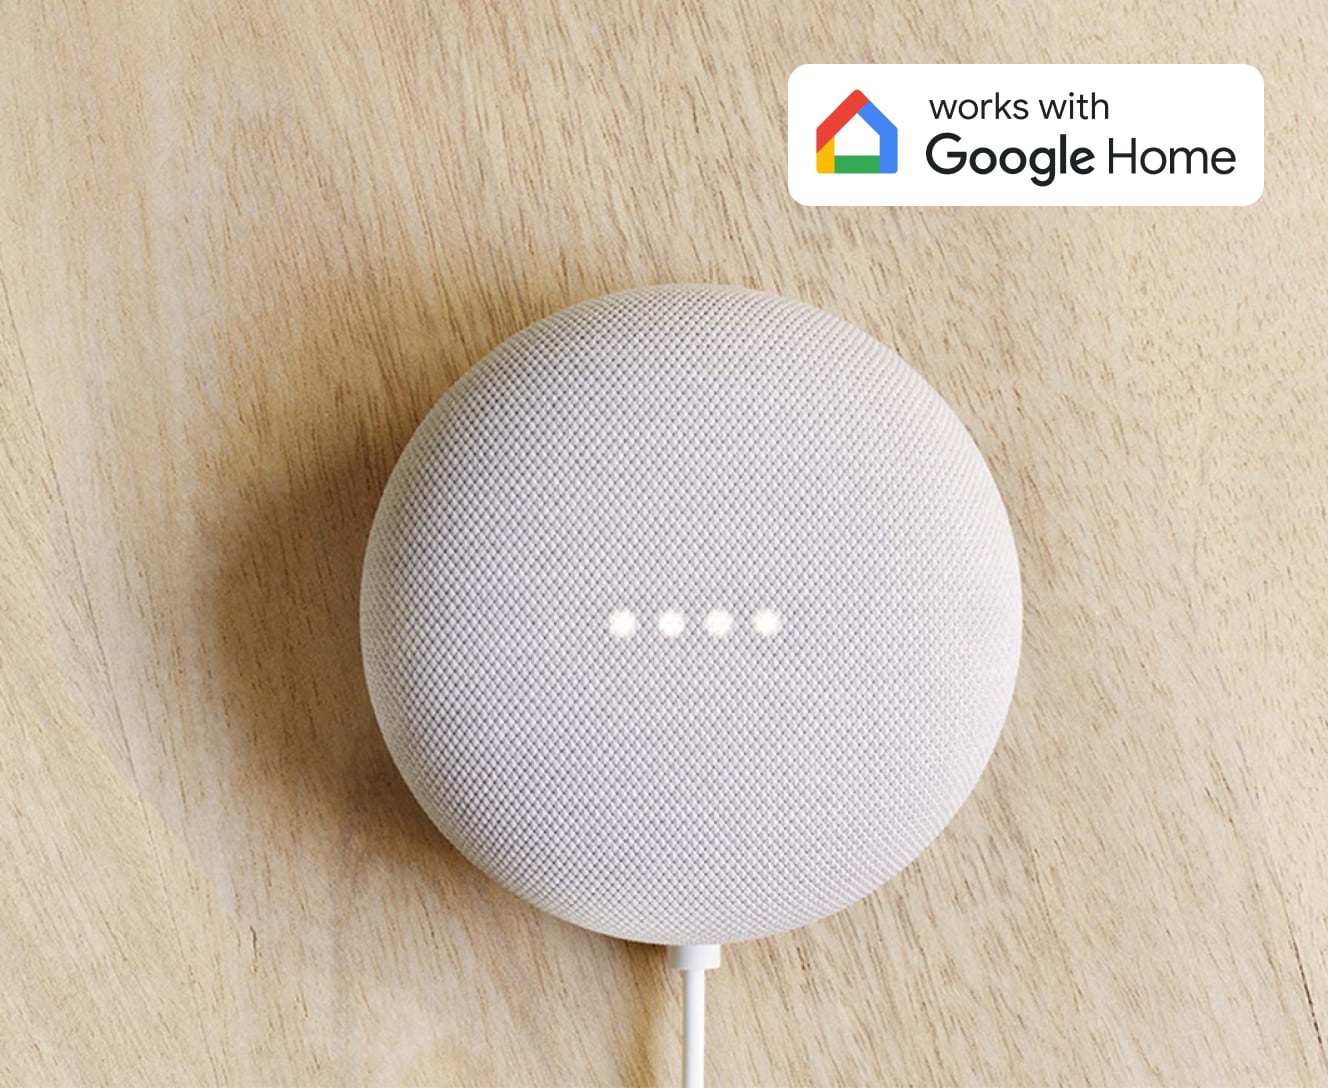 Google mini, ADT works with Google Home